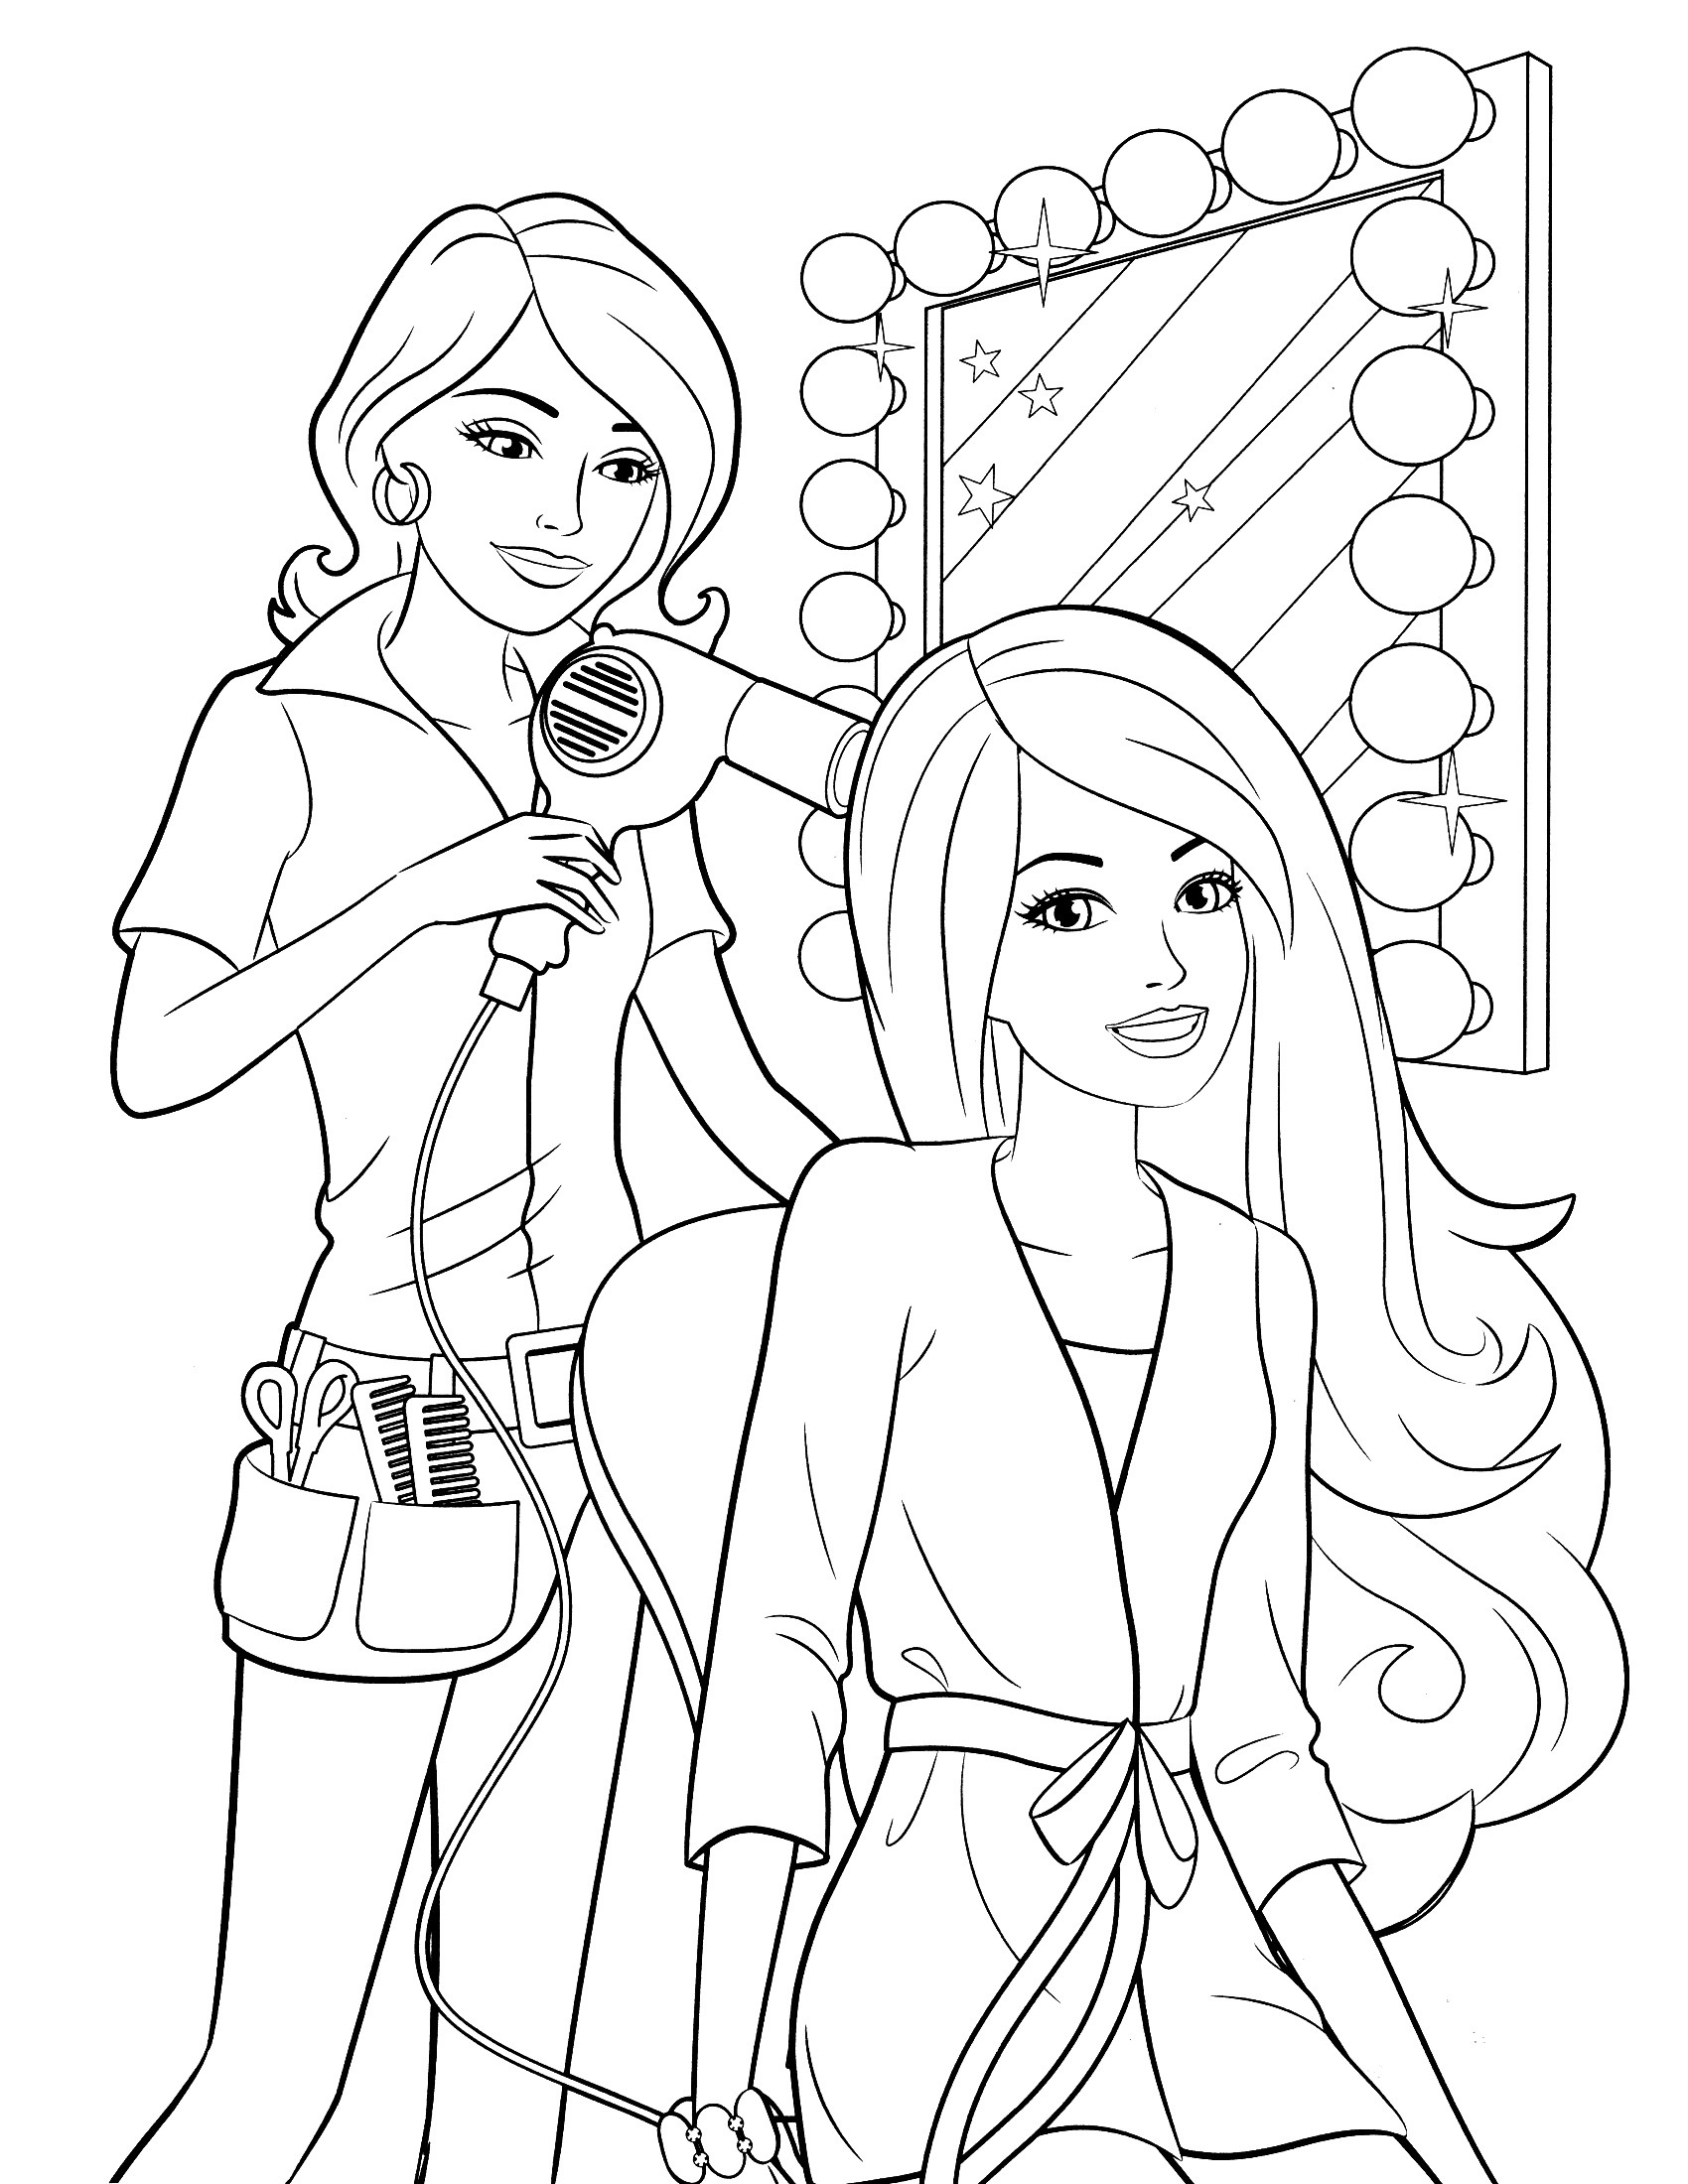 Girls Coloring Sheets
 Coloring Pages for Girls Best Coloring Pages For Kids